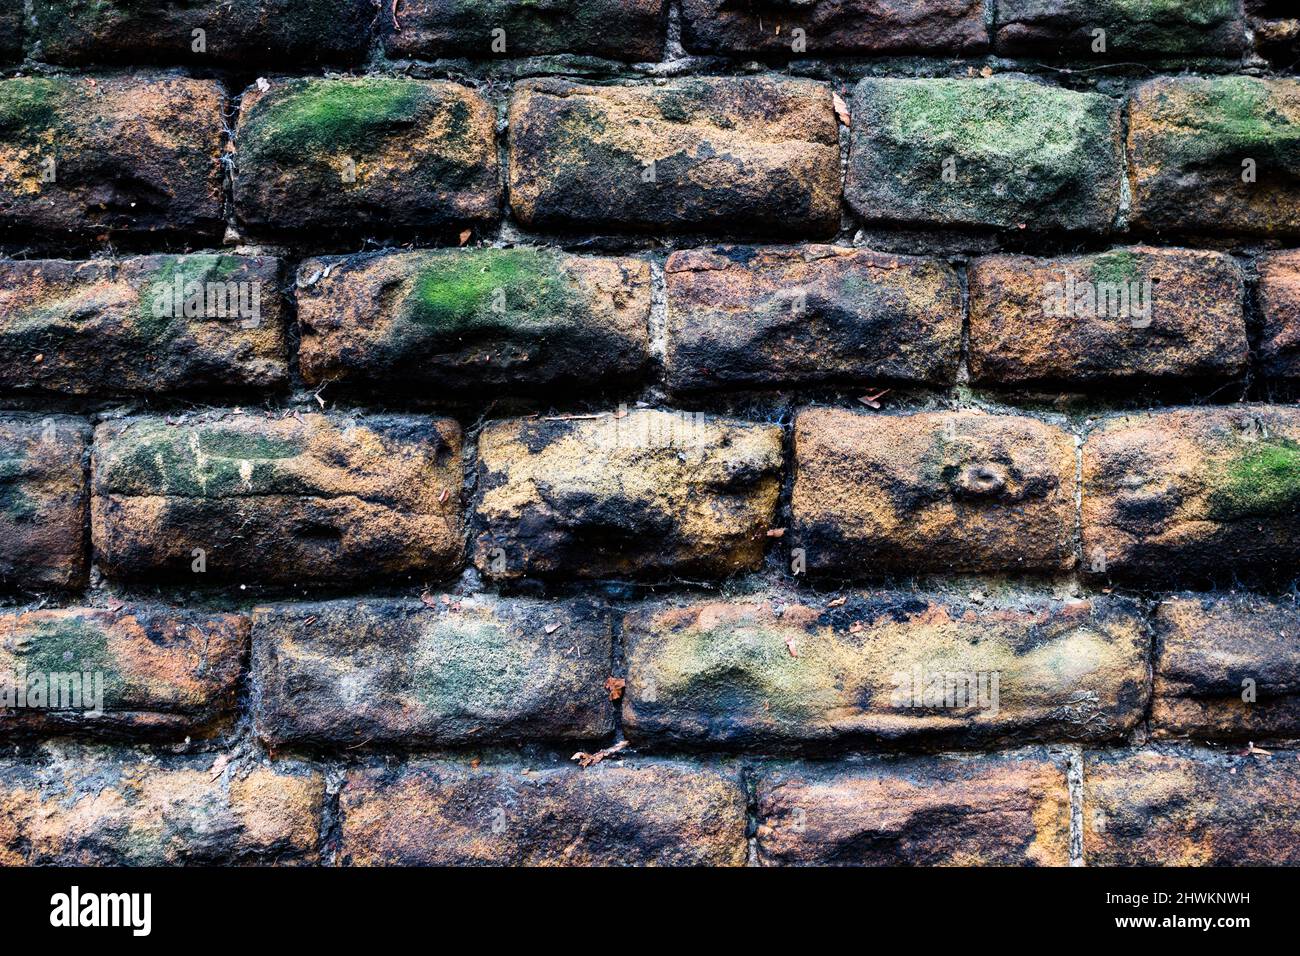 Image of a Stone Wall with Moss, Piece By Piece, Brick by Brick, Wall, Solid, Secure, Obstacle, Brick Wall Background, Colourful Bricks, Defined Stock Photo